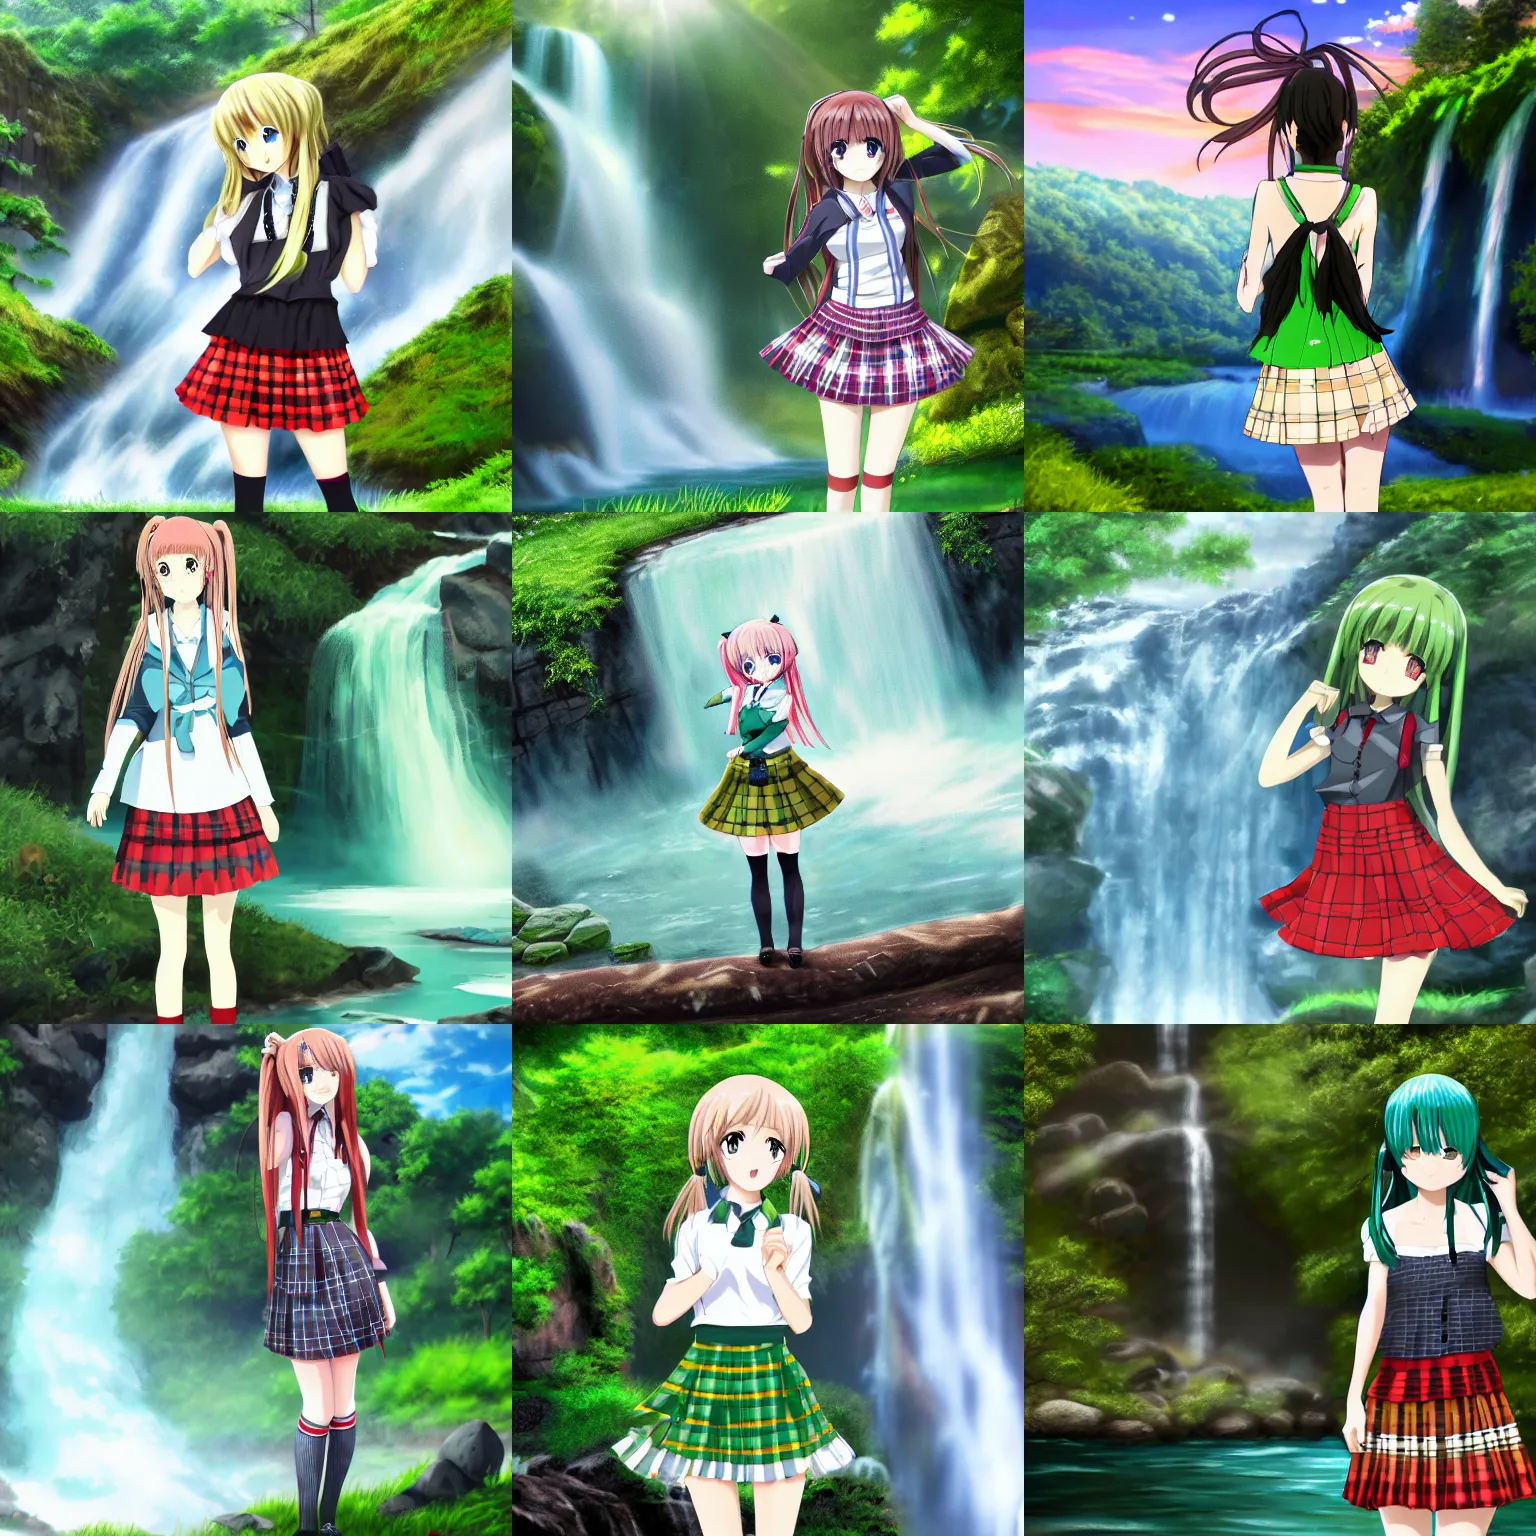 Prompt: high quality anime-style image of a beautiful woman wearing a plaid schoolgirl skirt, green curled pigtails hair, standing near a waterfall, 4k, digital art, wallpaper